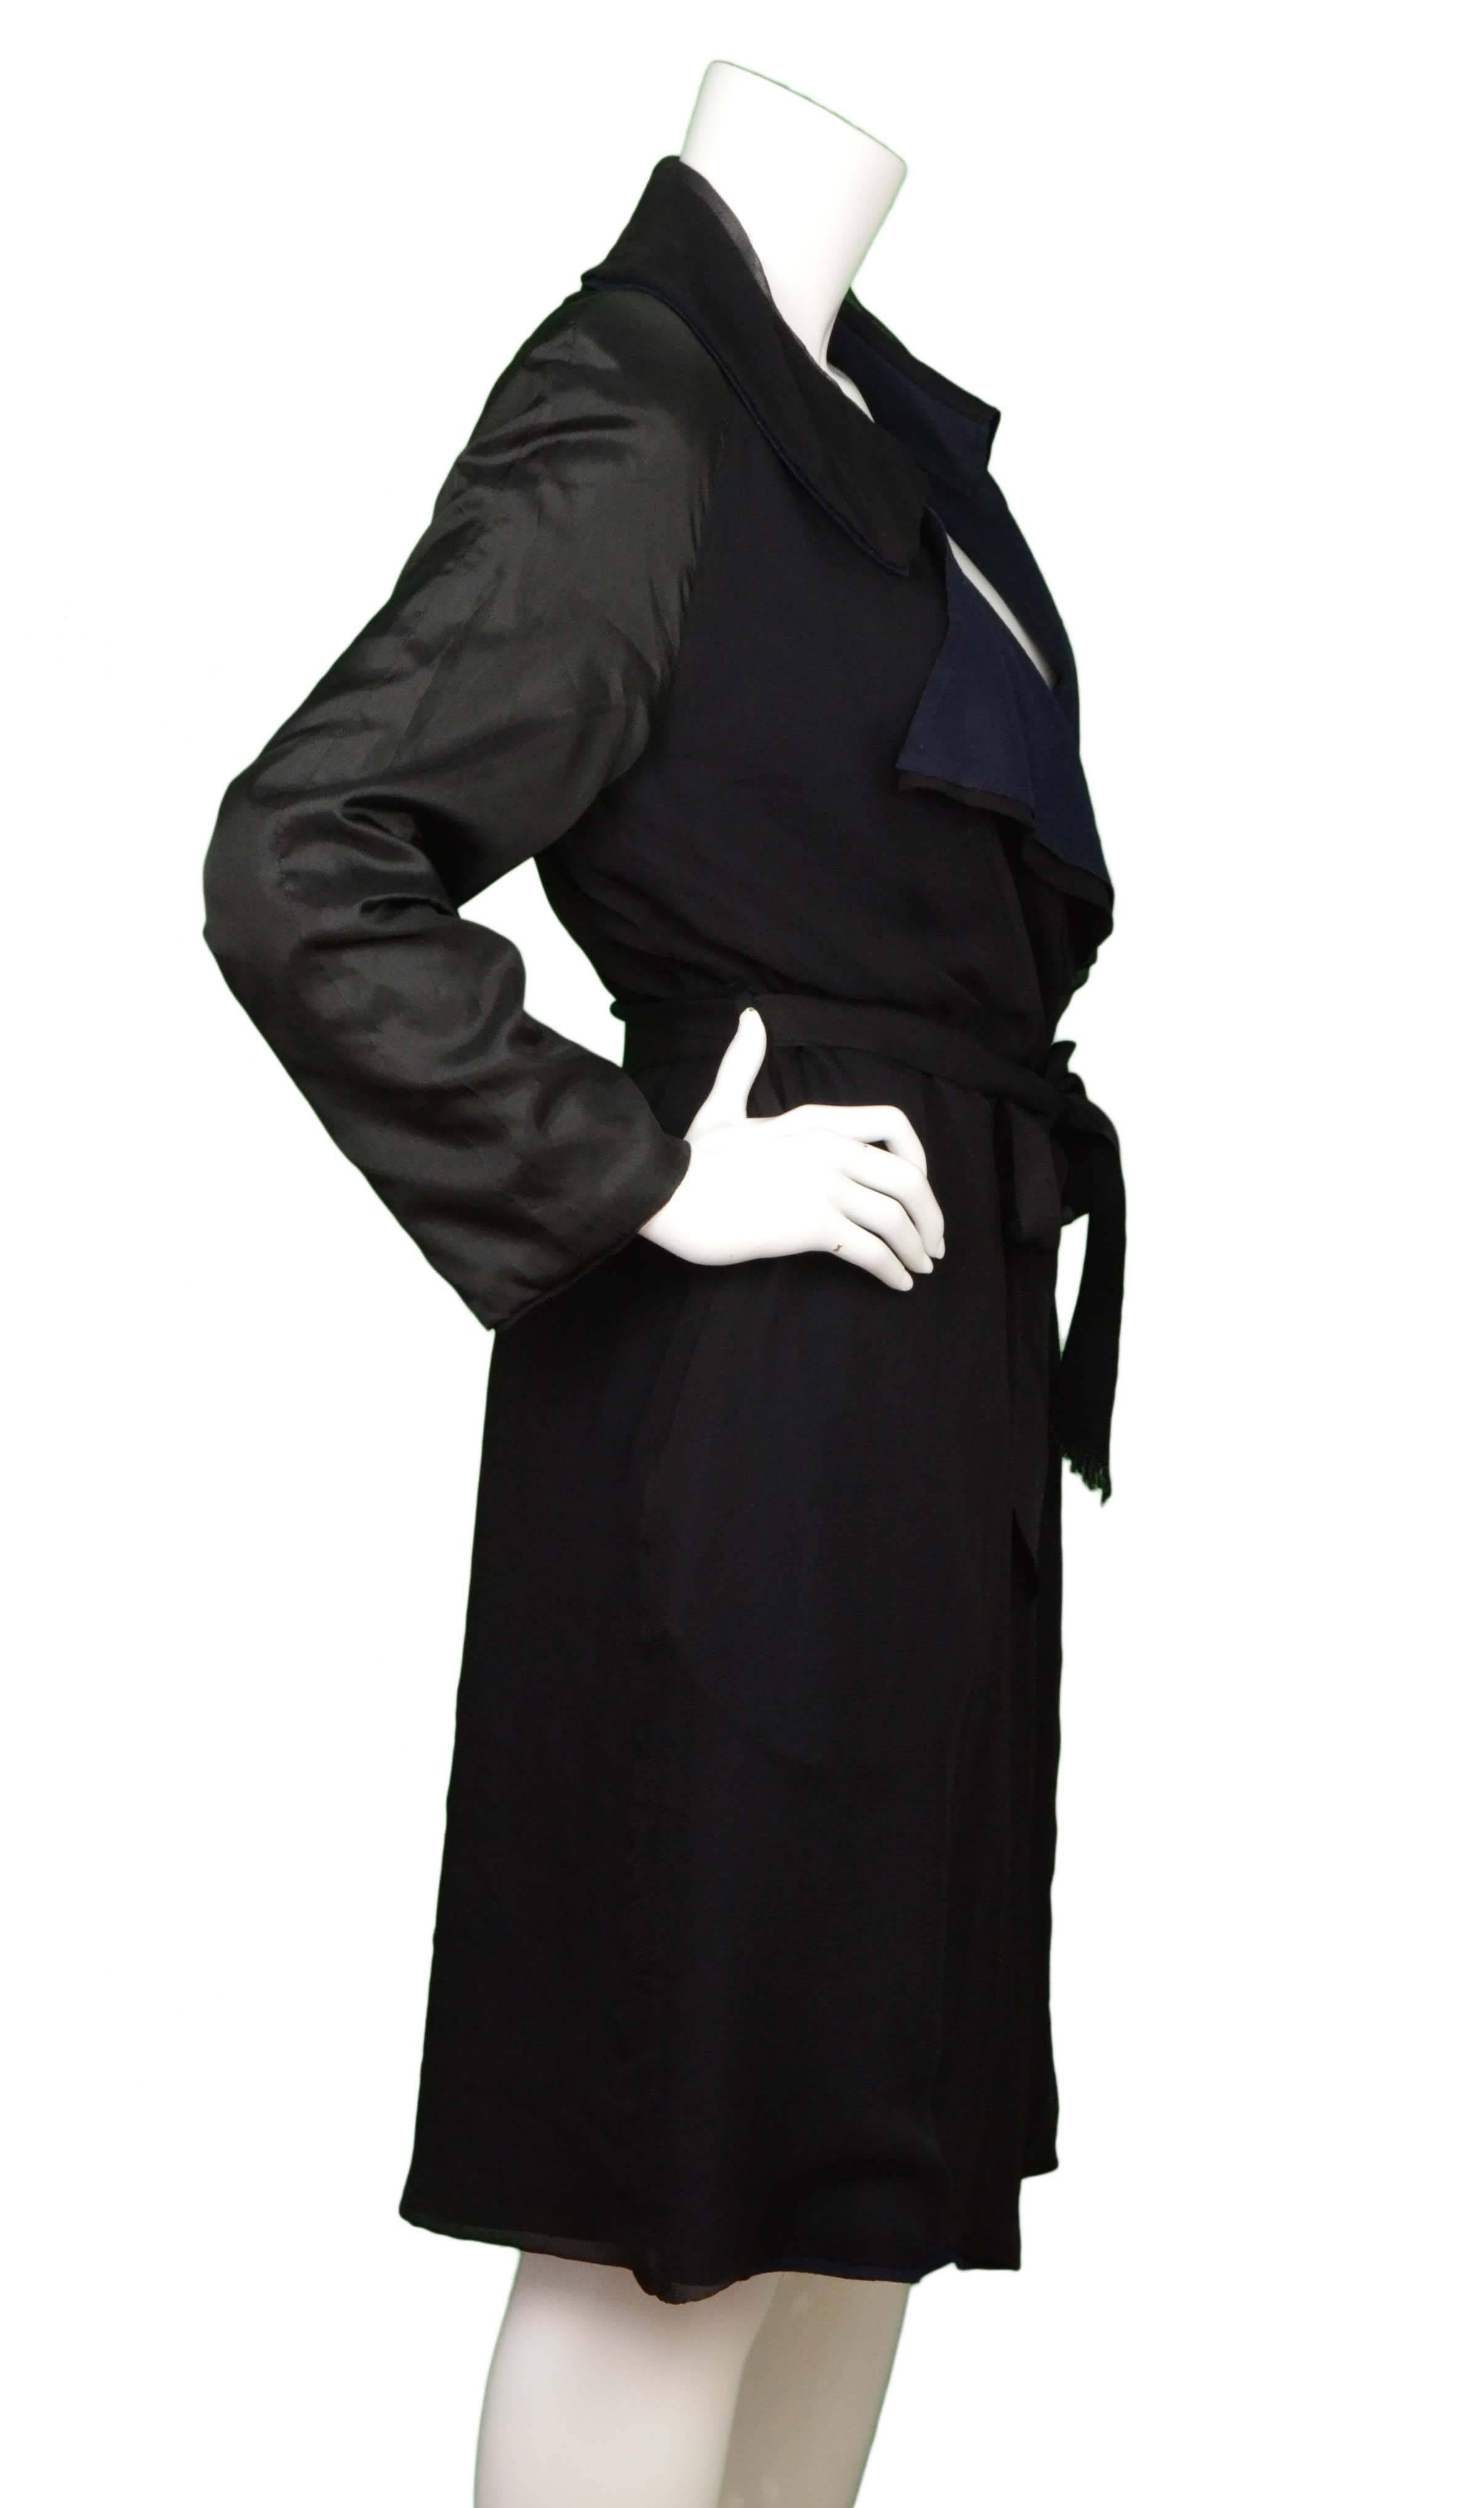 Lanvin Navy & Black Silk Long Coat 
Features waist tie
Made In: France
Color: Navy and black
Composition: 100% weaved silk
Lining: Navy knitted wool
Closure/Opening: Open front with waist tie
Exterior Pockets: Two hip pockets
Interior